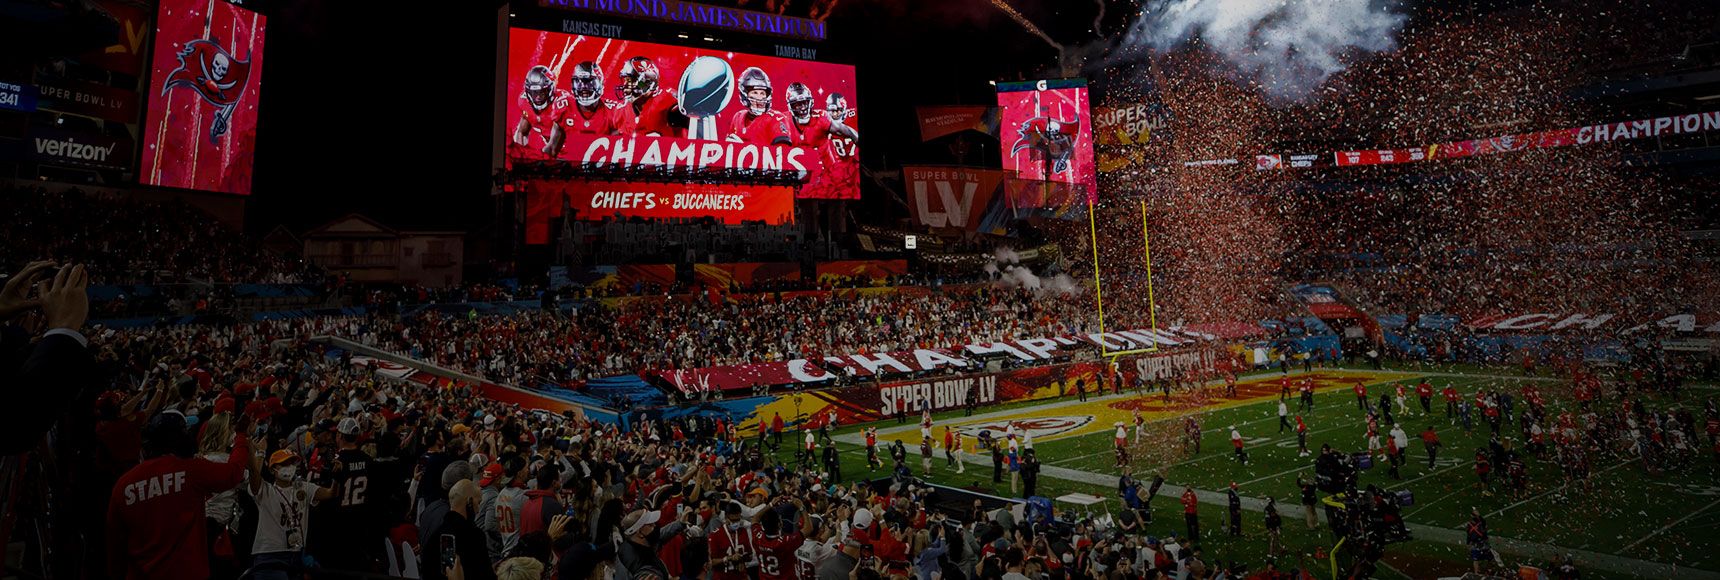 Confetti falls as the buccaneers celebrate winning Superbowl LV